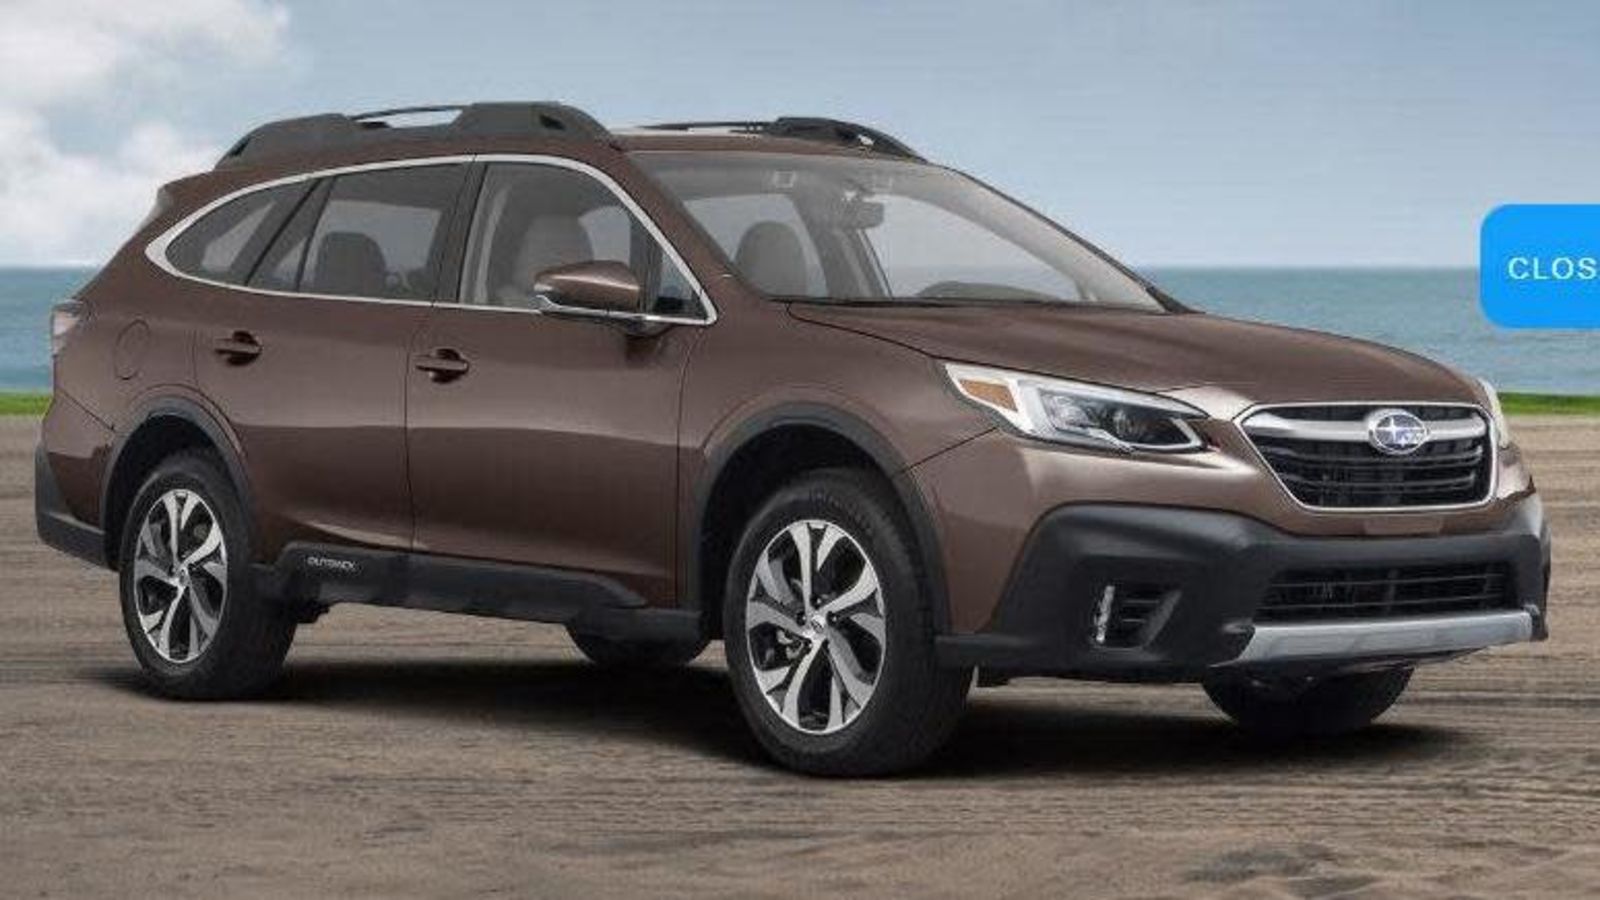 Illustration for article titled 2020 Subaru Outback - Initial Ownership Review